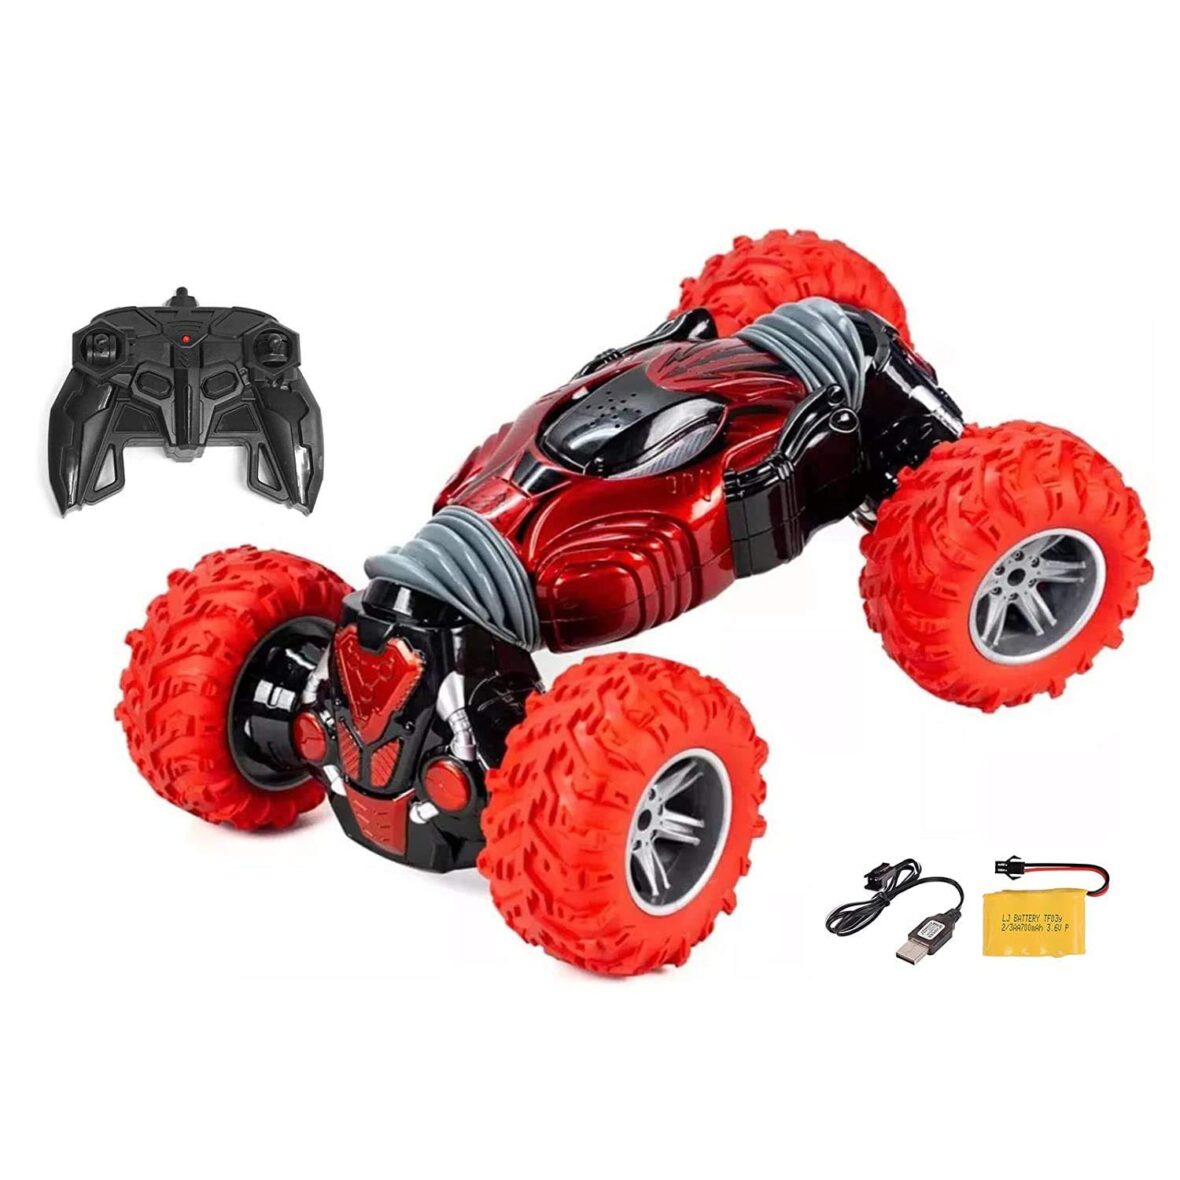 R/C Car: Twisted Climber Legends Champion | Two Sides Roll Off-Road Distortion Super Car | Off-Road Spine Design Twisted Climber All-Terrain Monster – Assorted Color